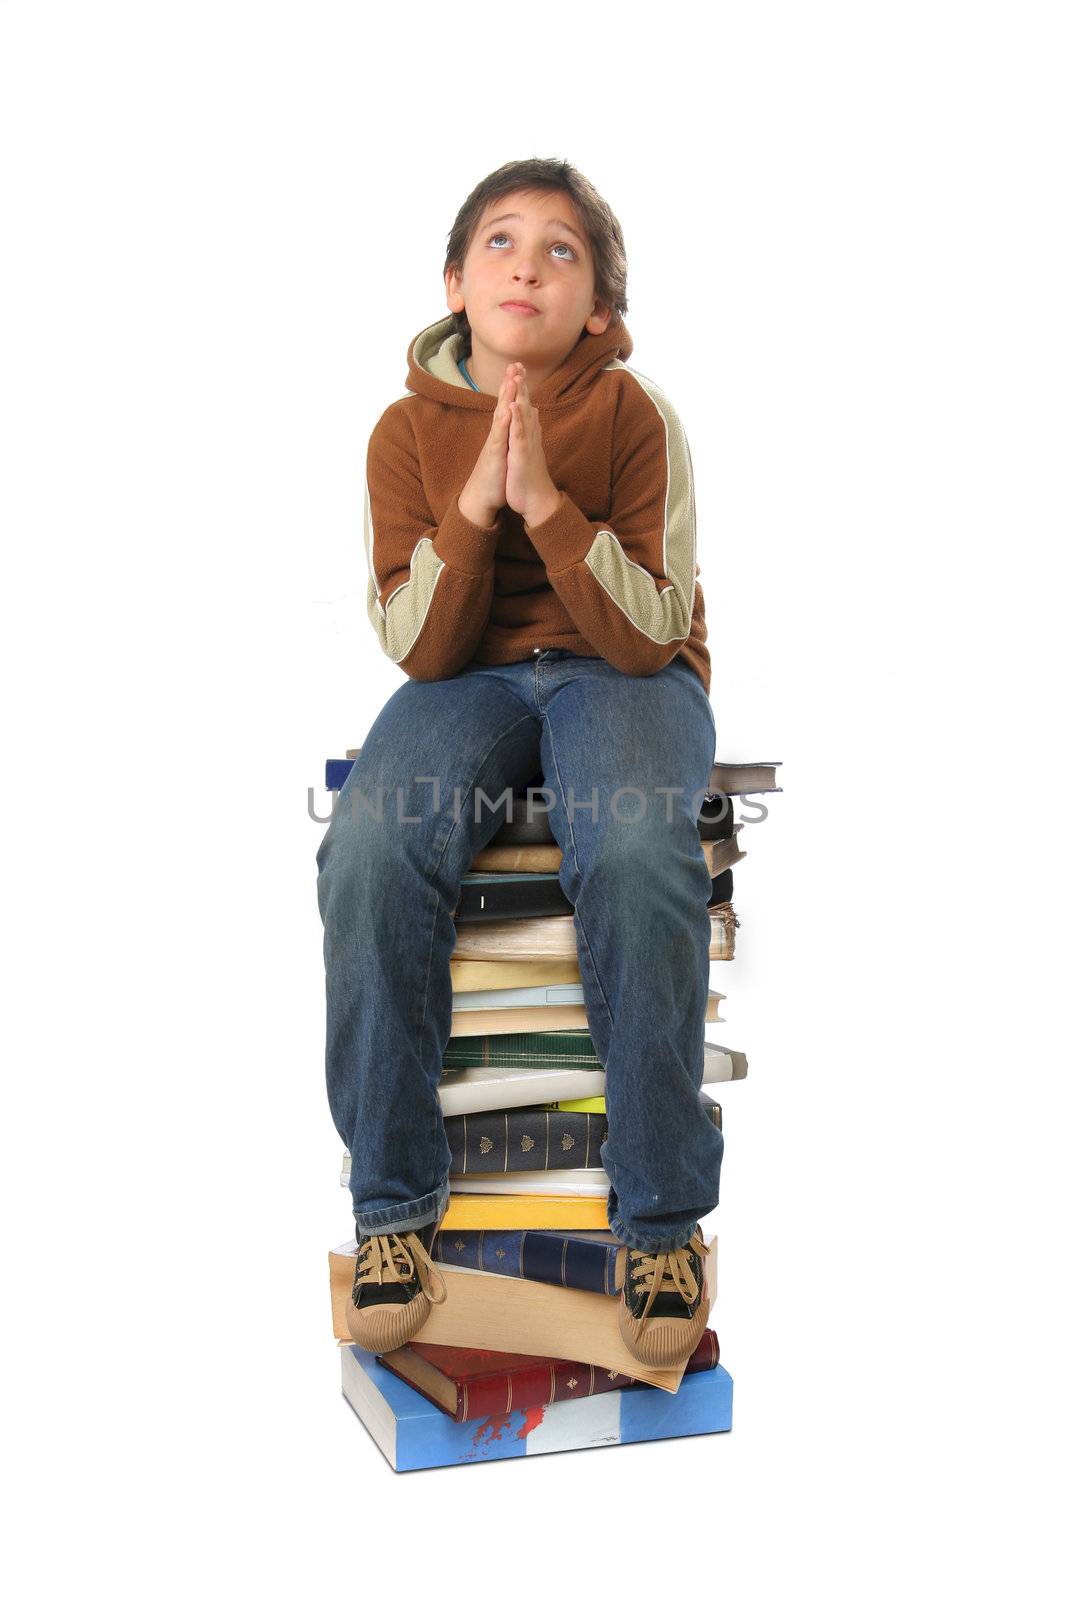 Boy sitting on a big pile of books. Different expressions (series)  